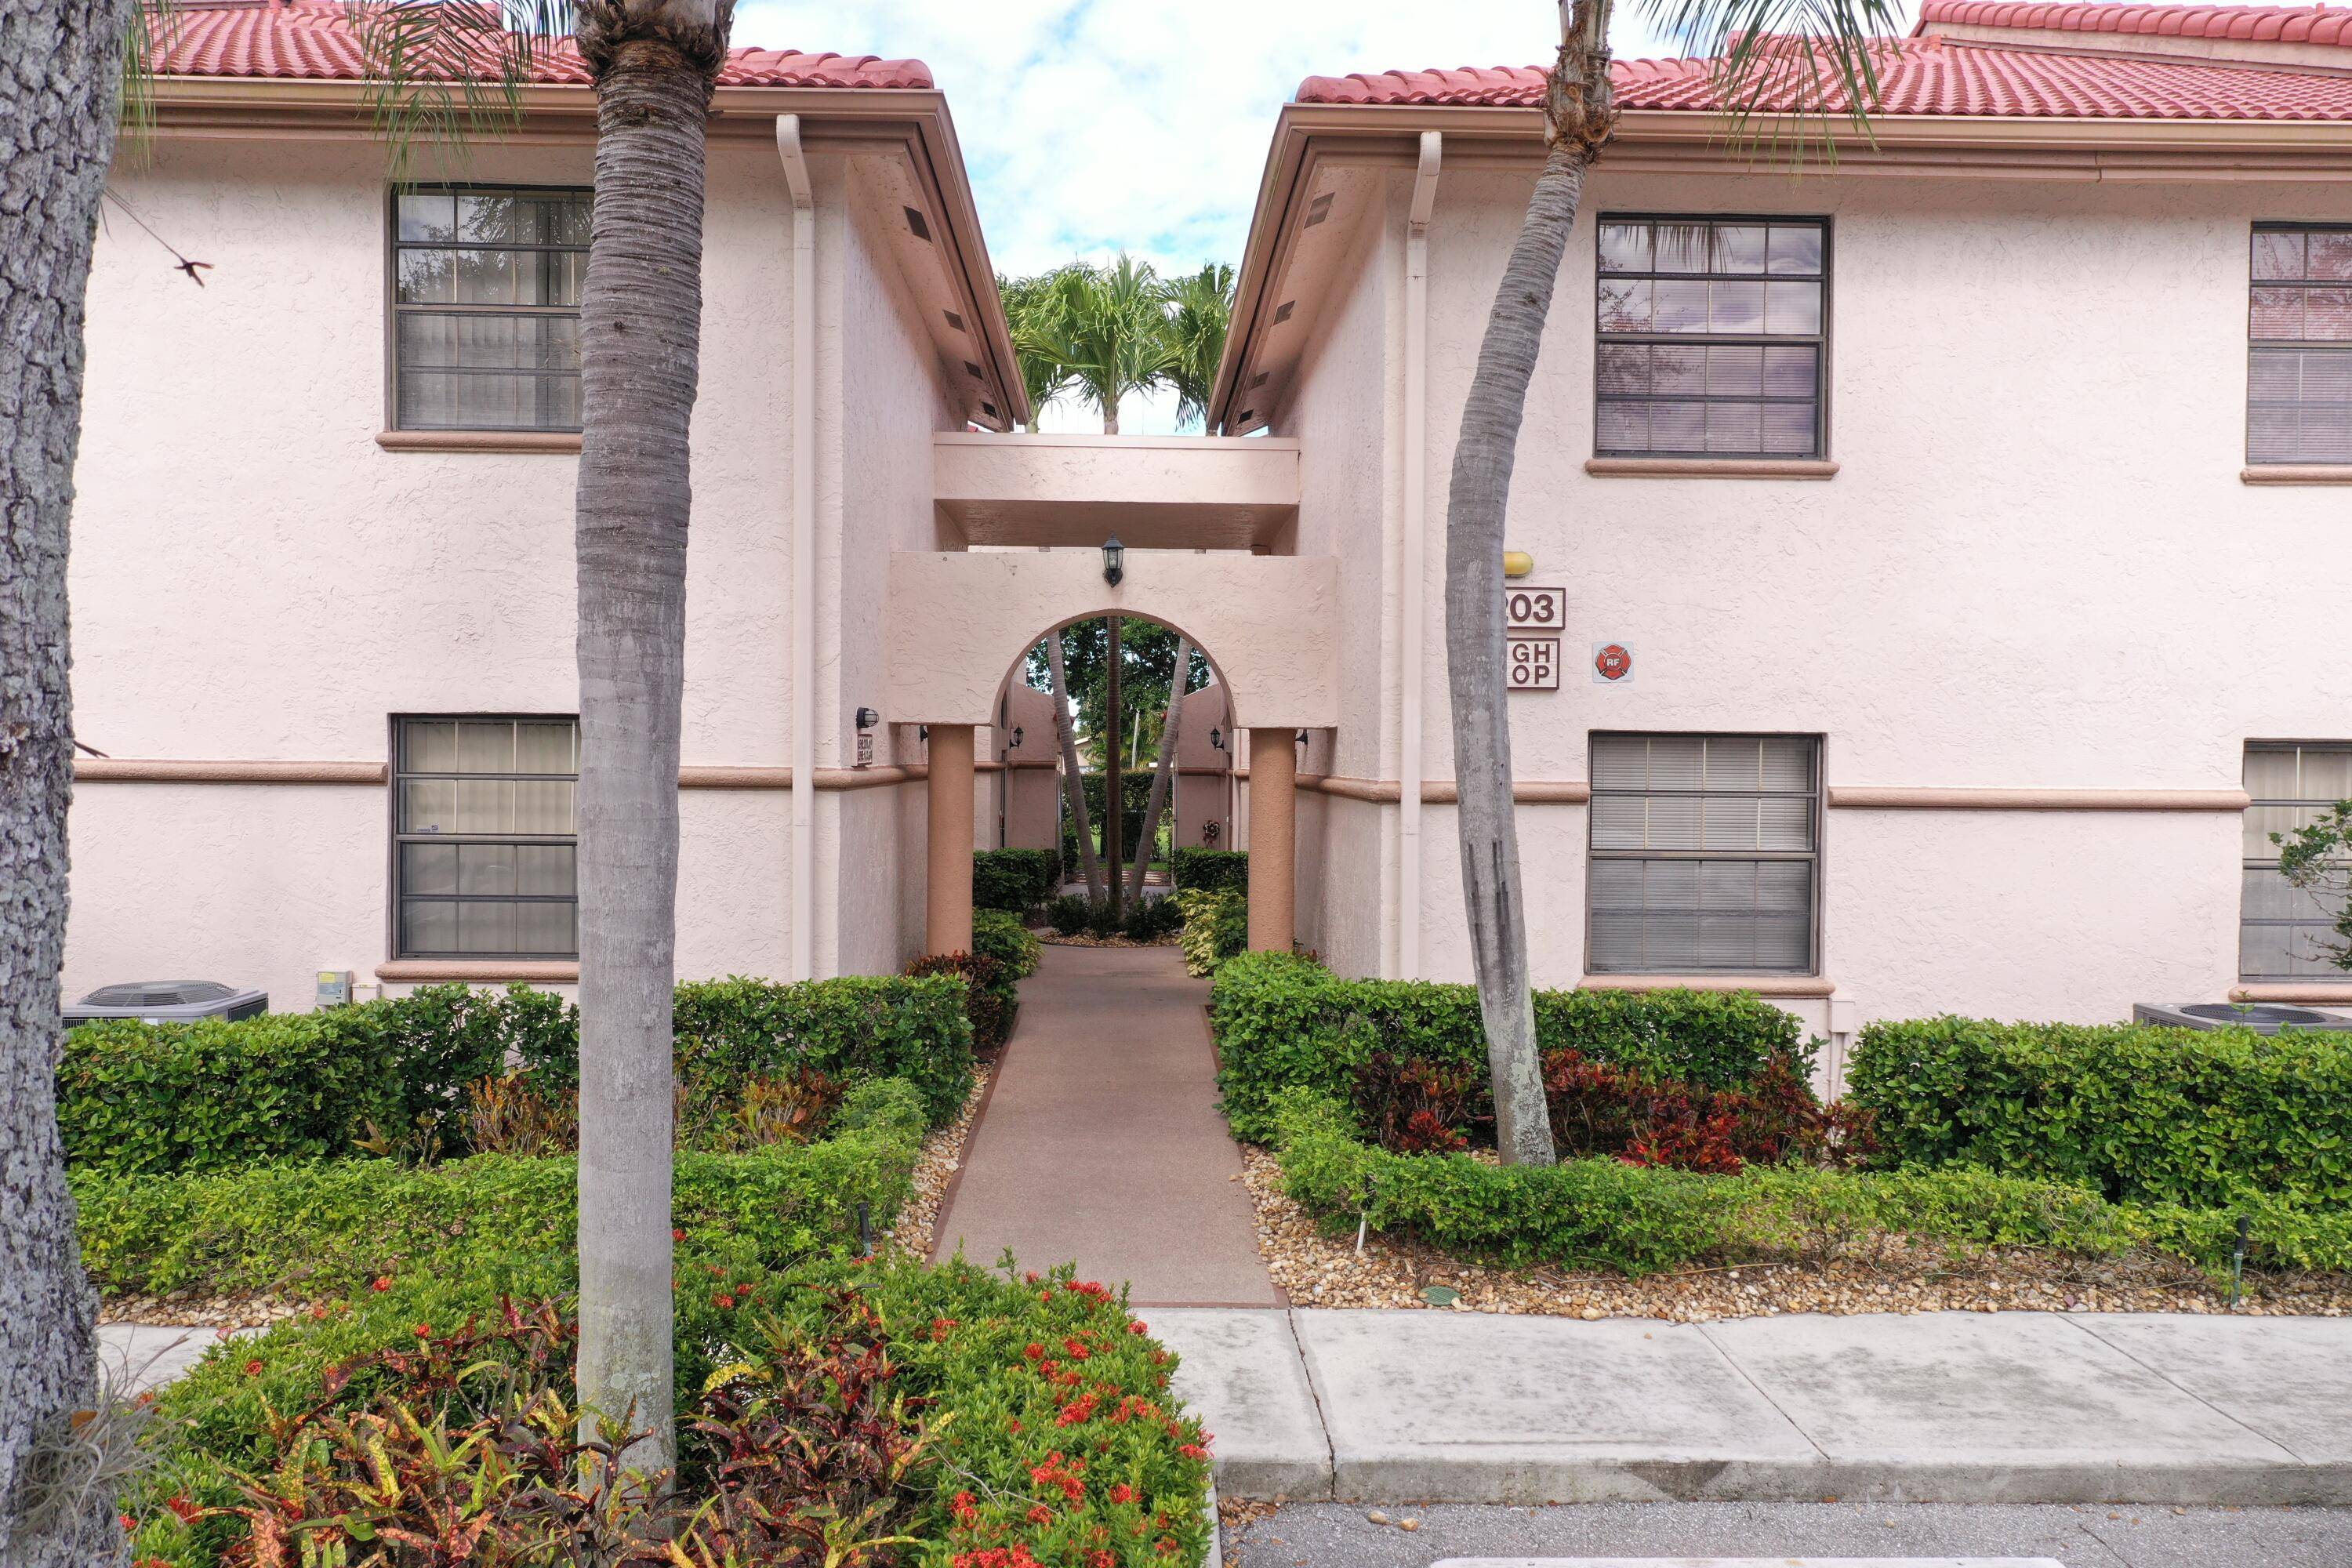 Don't delay seeing this METICULOUSLY MAINTAINED 2 BEDROOM DEN and 2 FULL BATH GRANDI MODEL condo with its own ELEVATOR in PLATINA'S DIAMANTE VILLAGE.